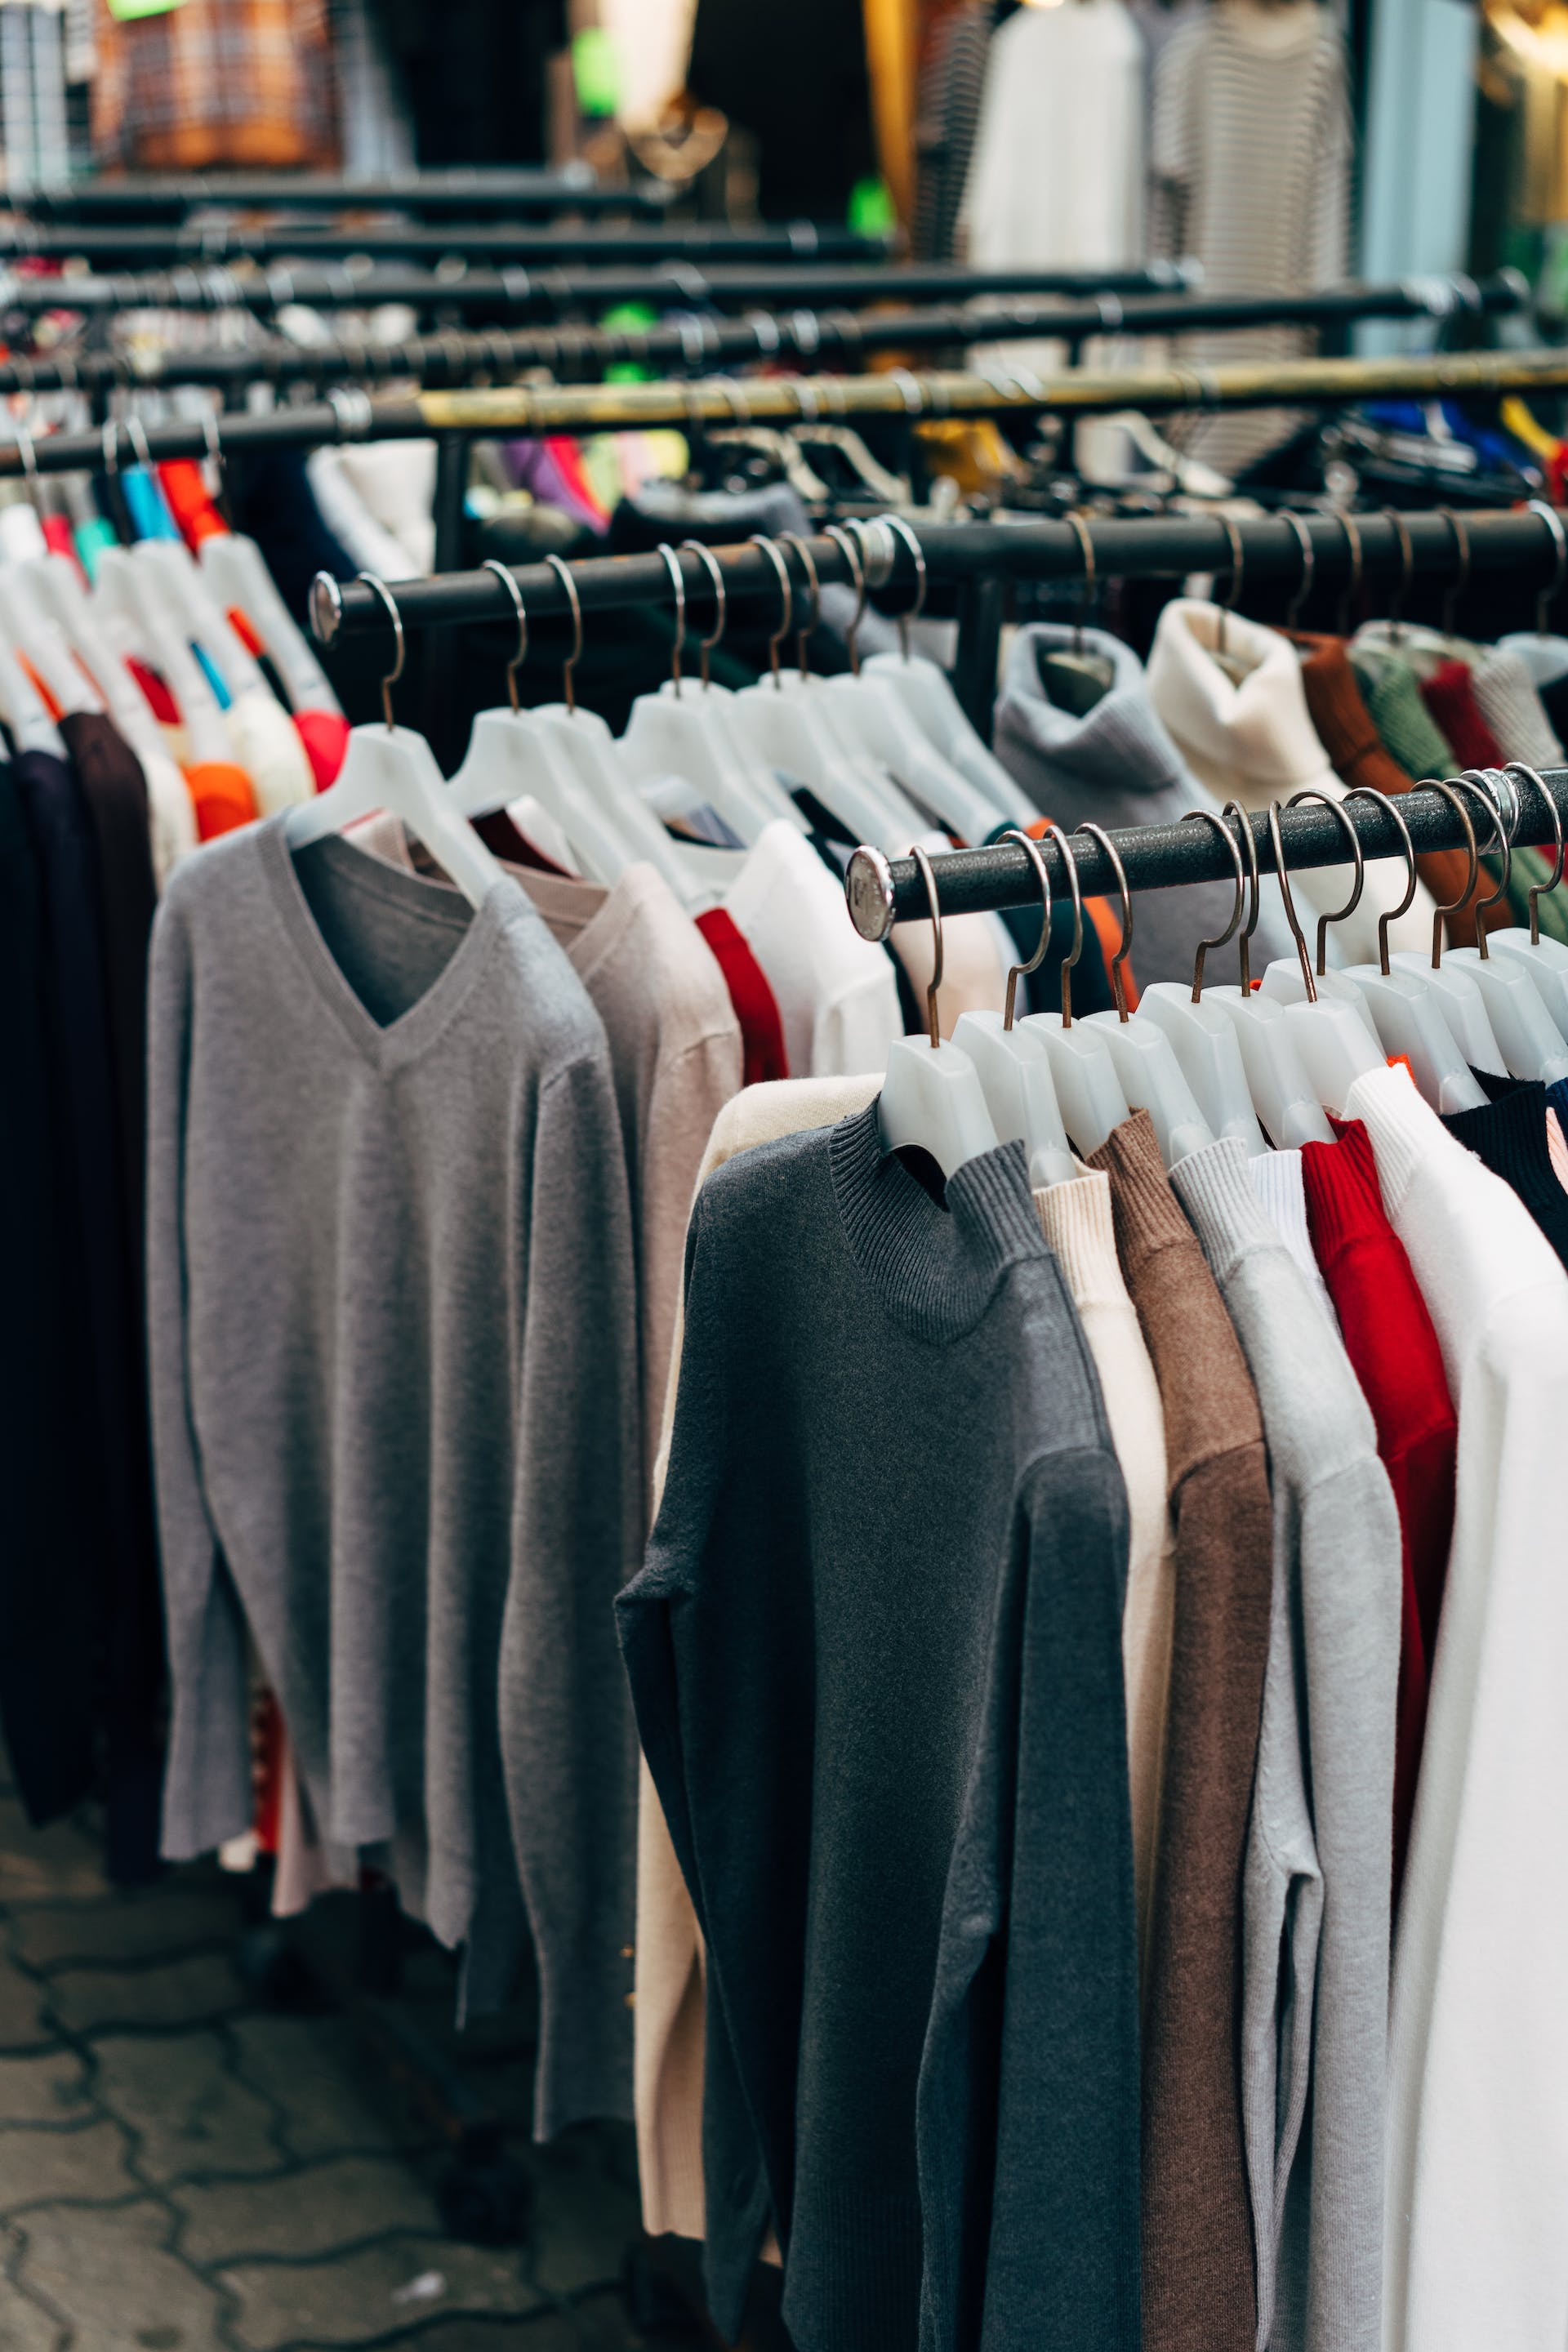 Clothes on hangers | Source: Pexels